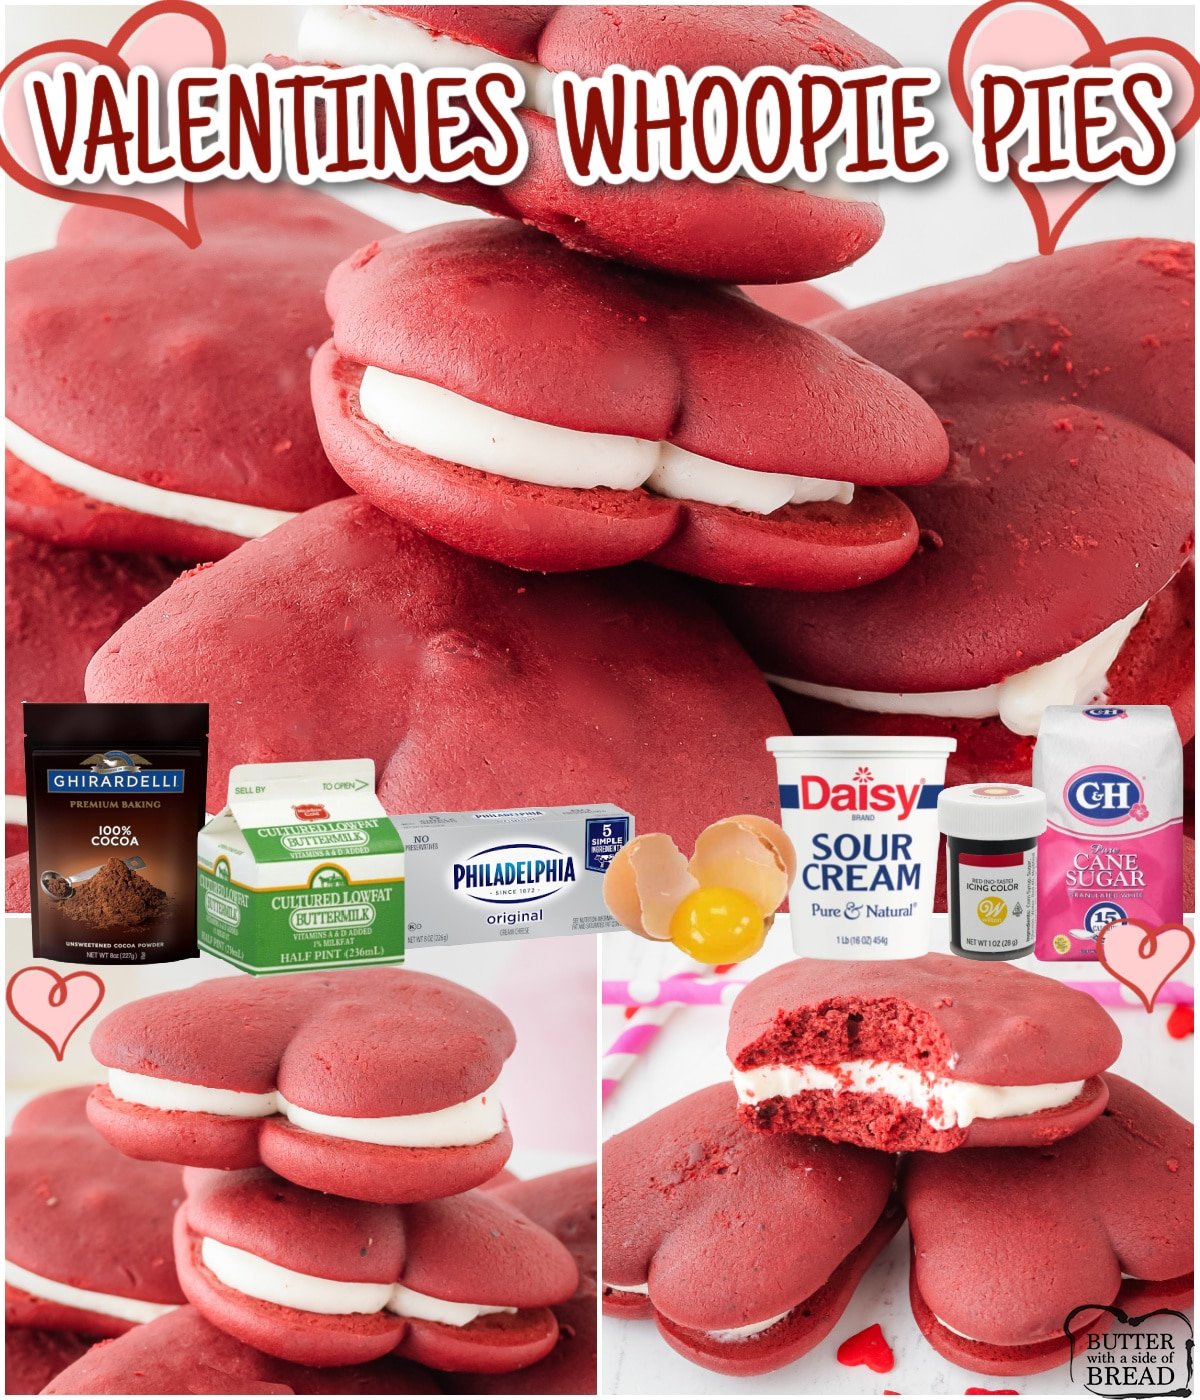 Festive red velvet Valentine's Whoopie Pies made from scratch with butter, sugars, buttermilk, cocoa powder & red coloring! Soft & decadent heart shaped pies filled with silky cream cheese frosting everyone loves! 